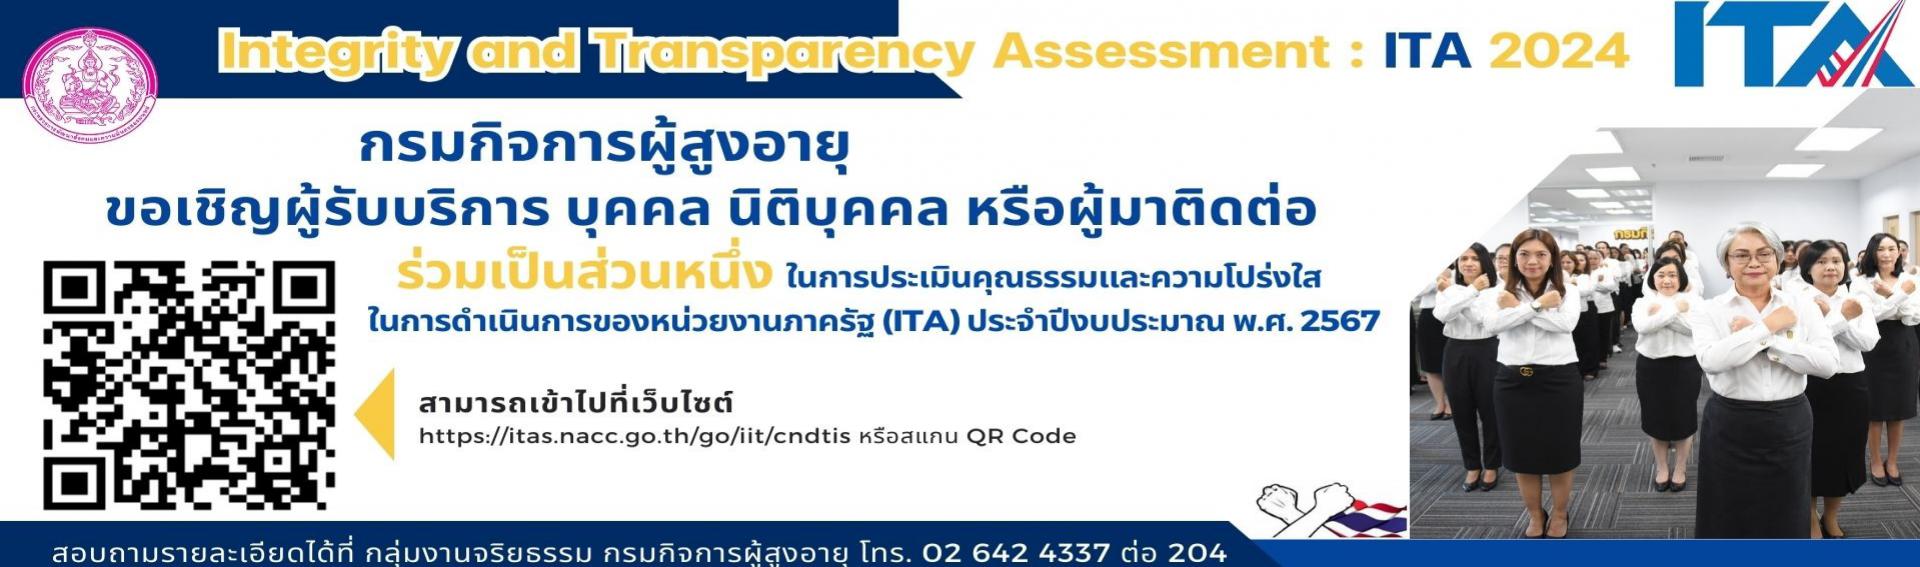 Integrity and Transparency Assessment : ITA 2024